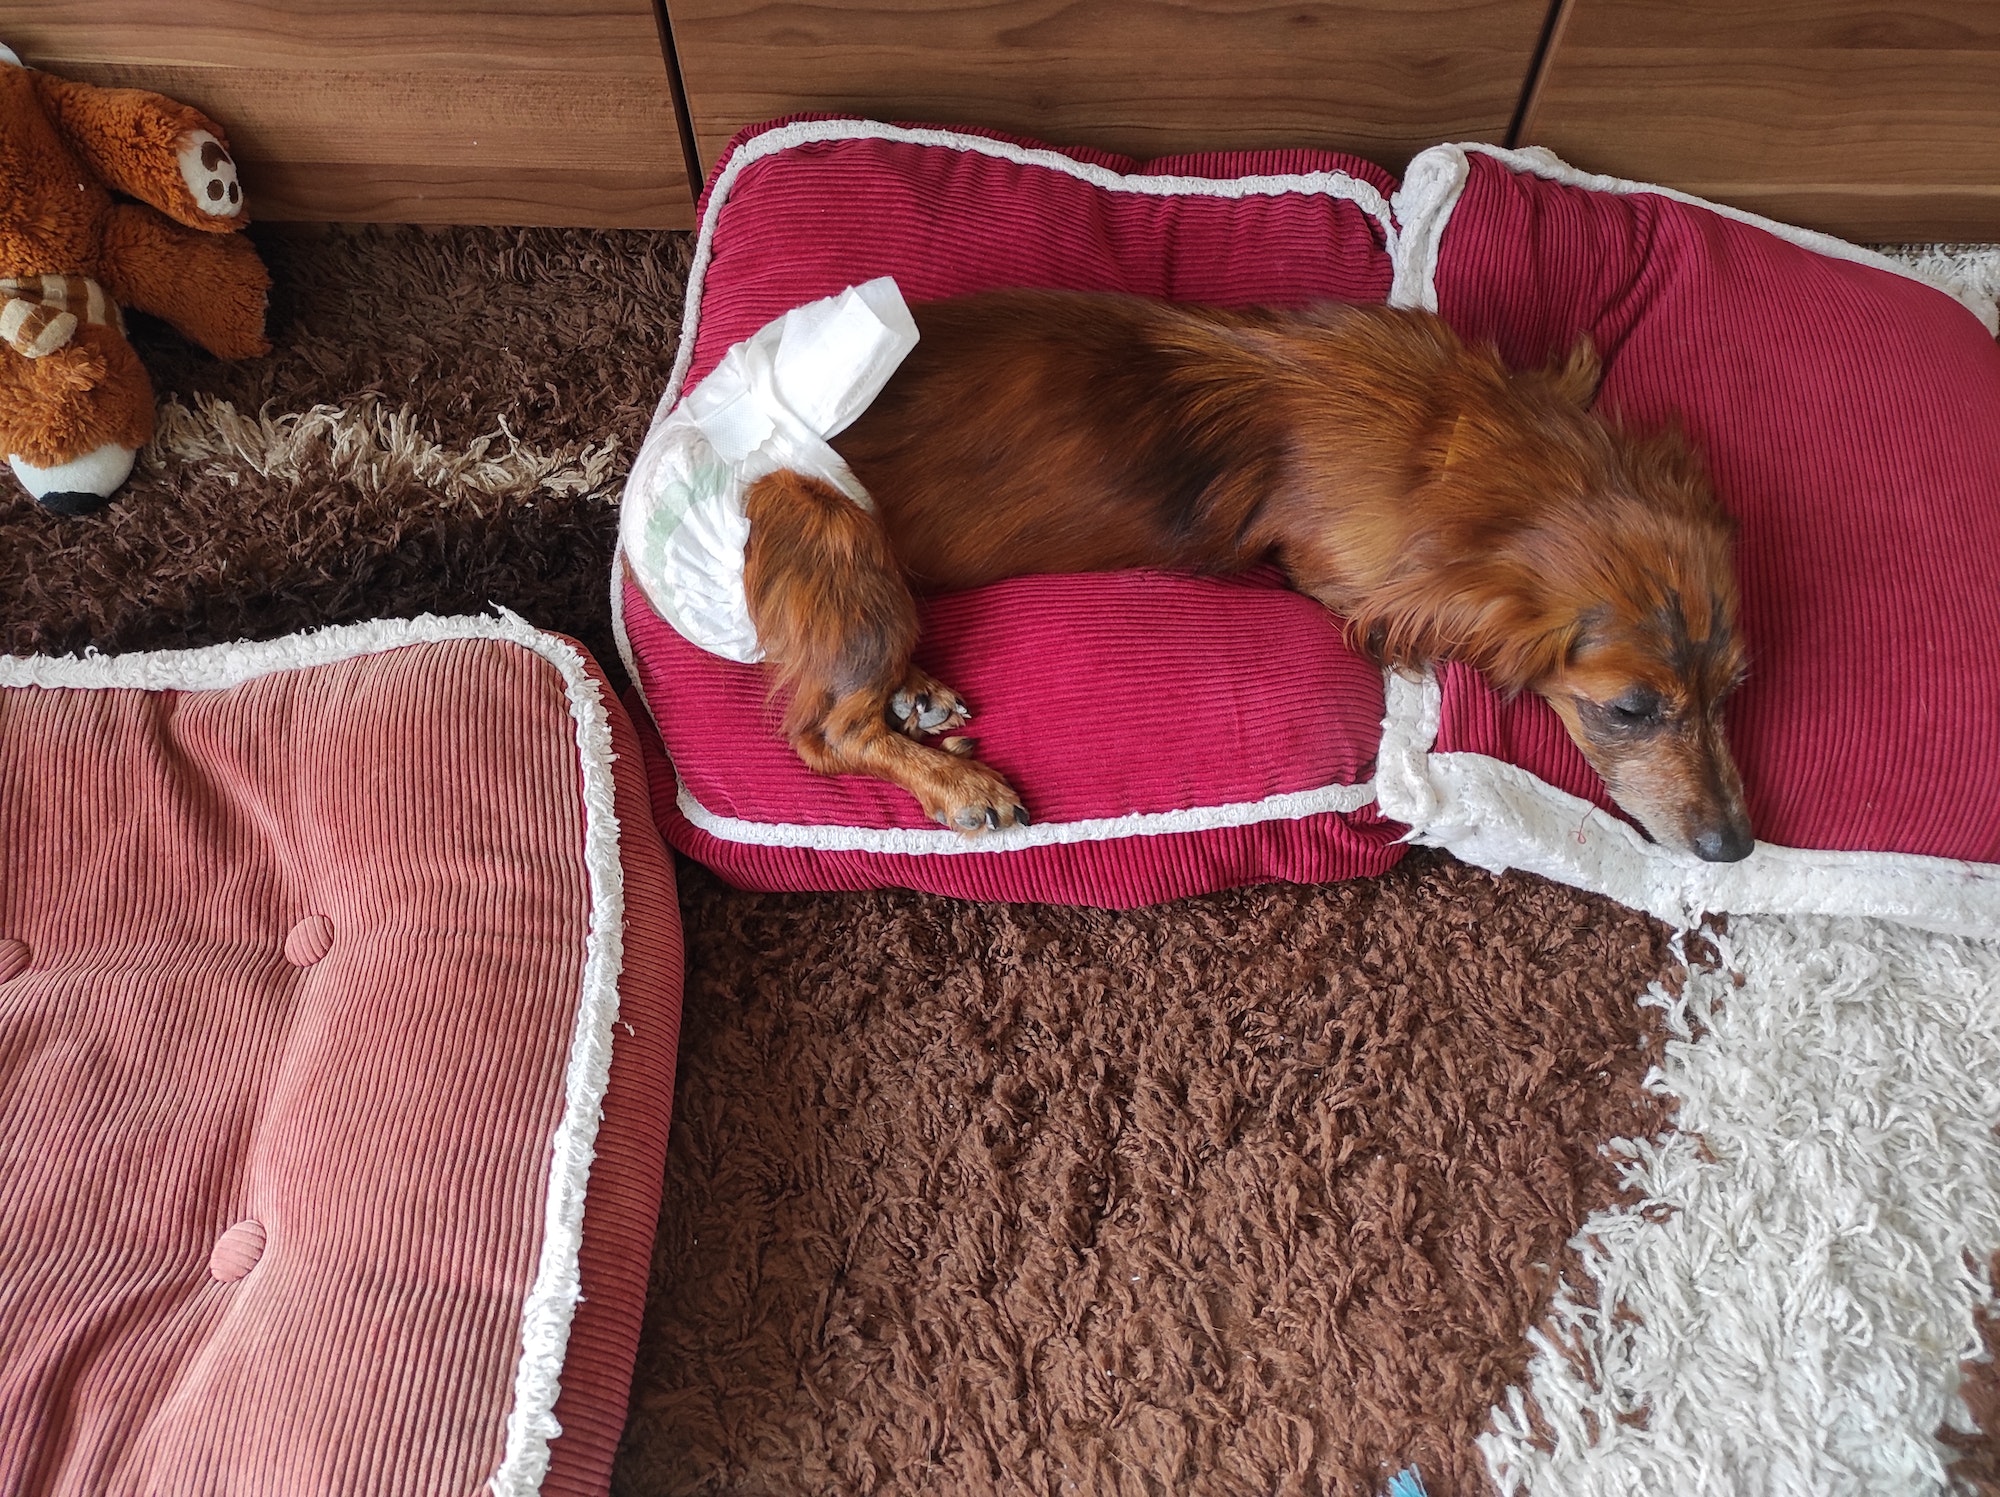 Dog dachshund with diapers lying on pillows on the floor